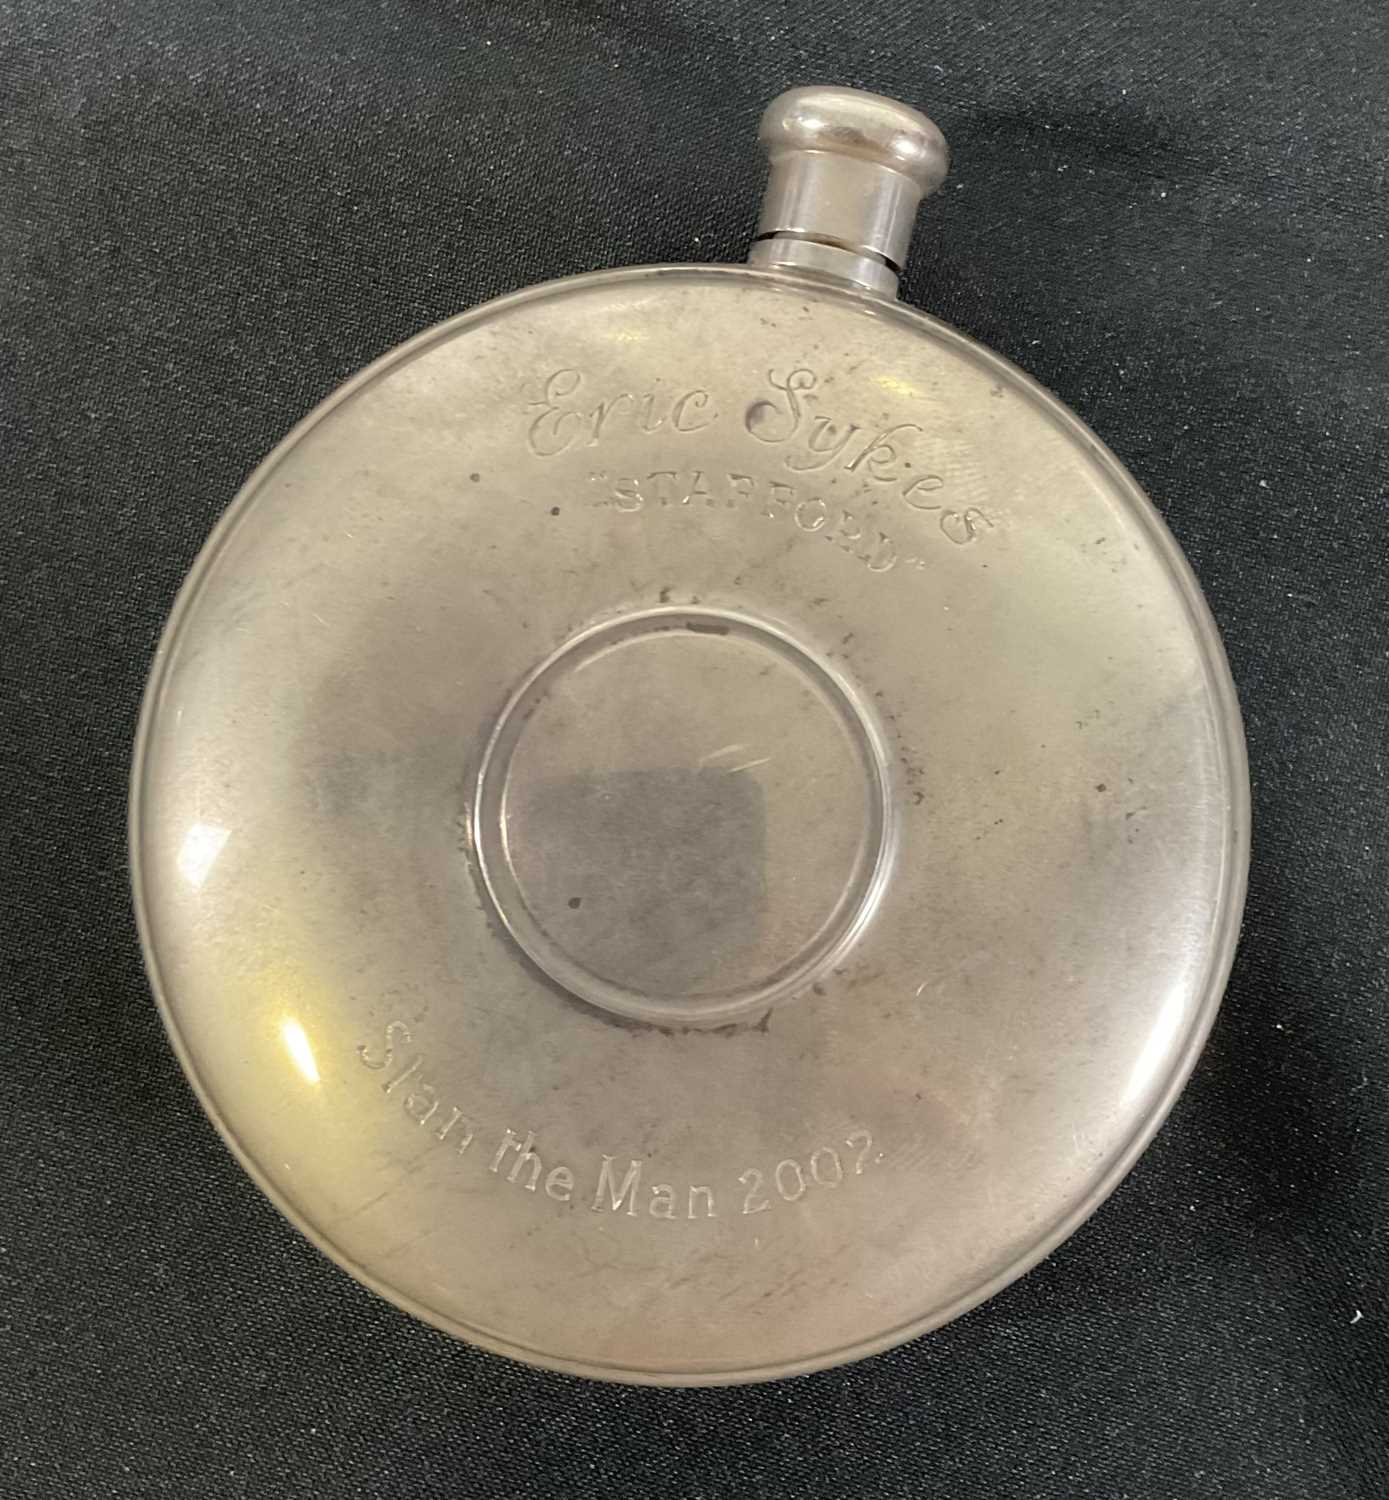 A sterling silver hip flask presented to ERIC SYKES for working on STAN THE MAN (2002) engraved with